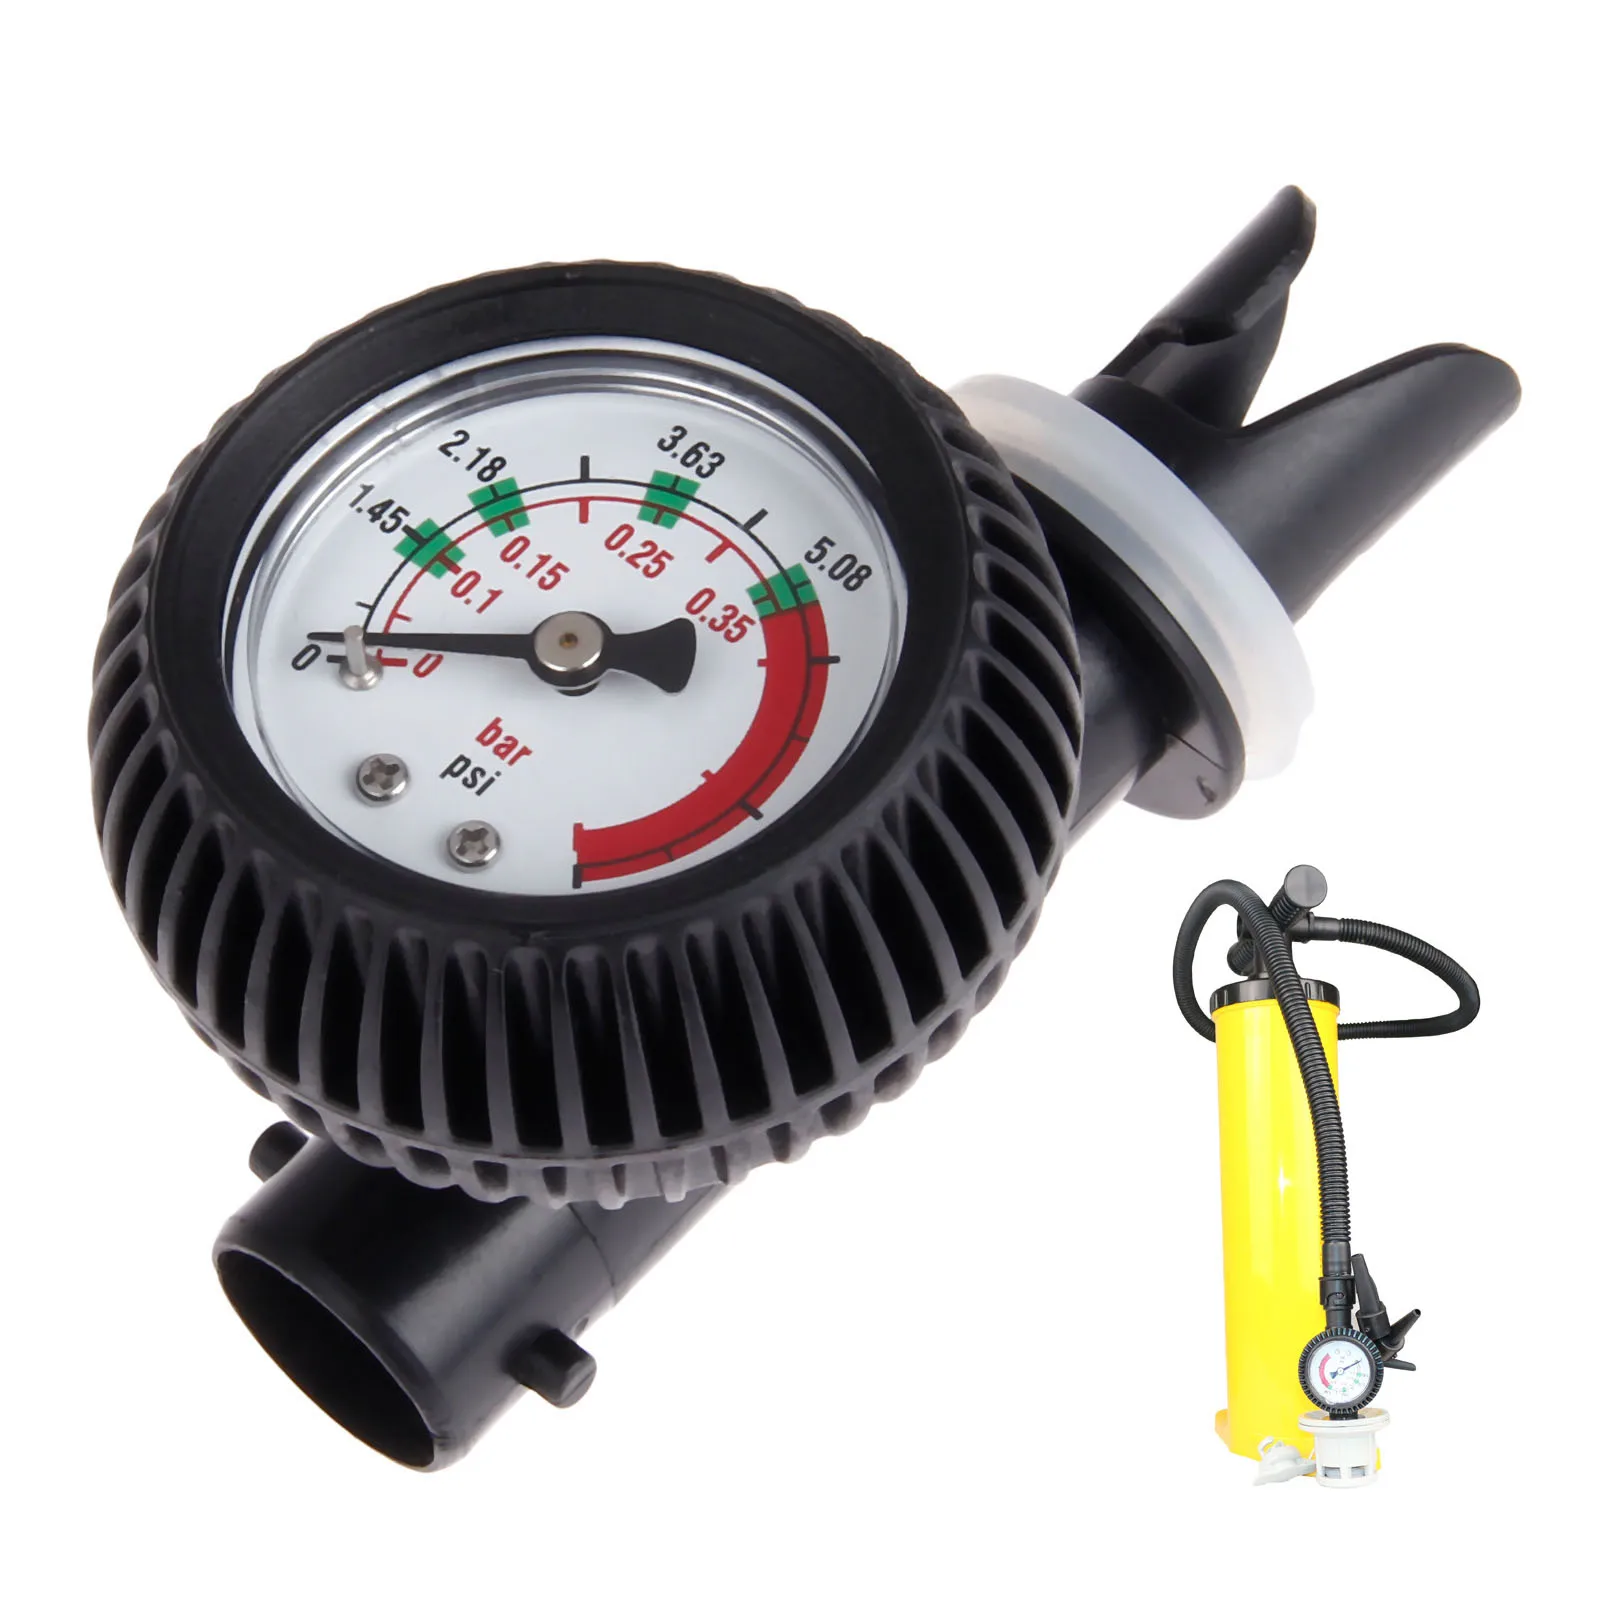 1 Pc Pressure Gauge Air Thermometer For Inflatable Boat Kayak Test Air Pressure Valve Connector Adapter Stand Up Paddle Boards hand pump air pressure gauge kayak air thermometer kayak test air valve connector sup stand up paddle board etc